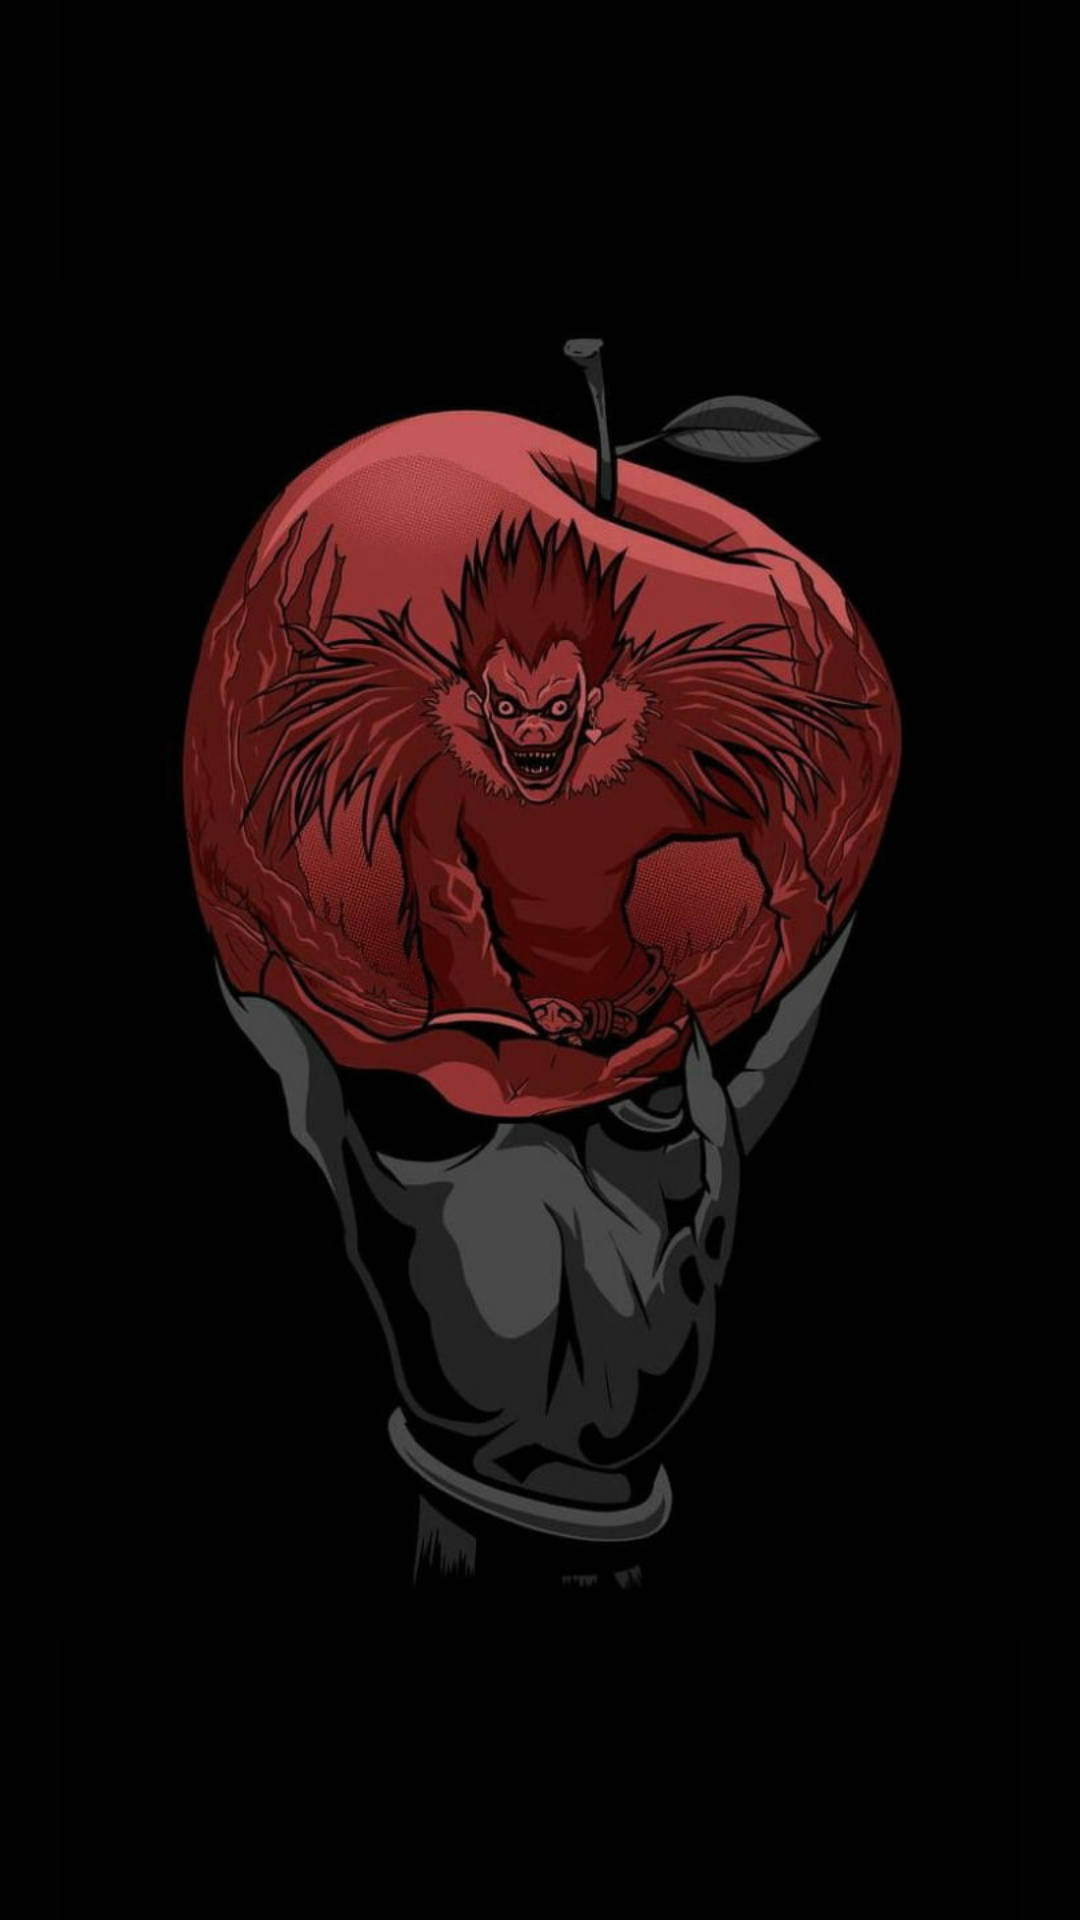 Apple Reflecting Ryuk From Death Note Phone Wallpaper